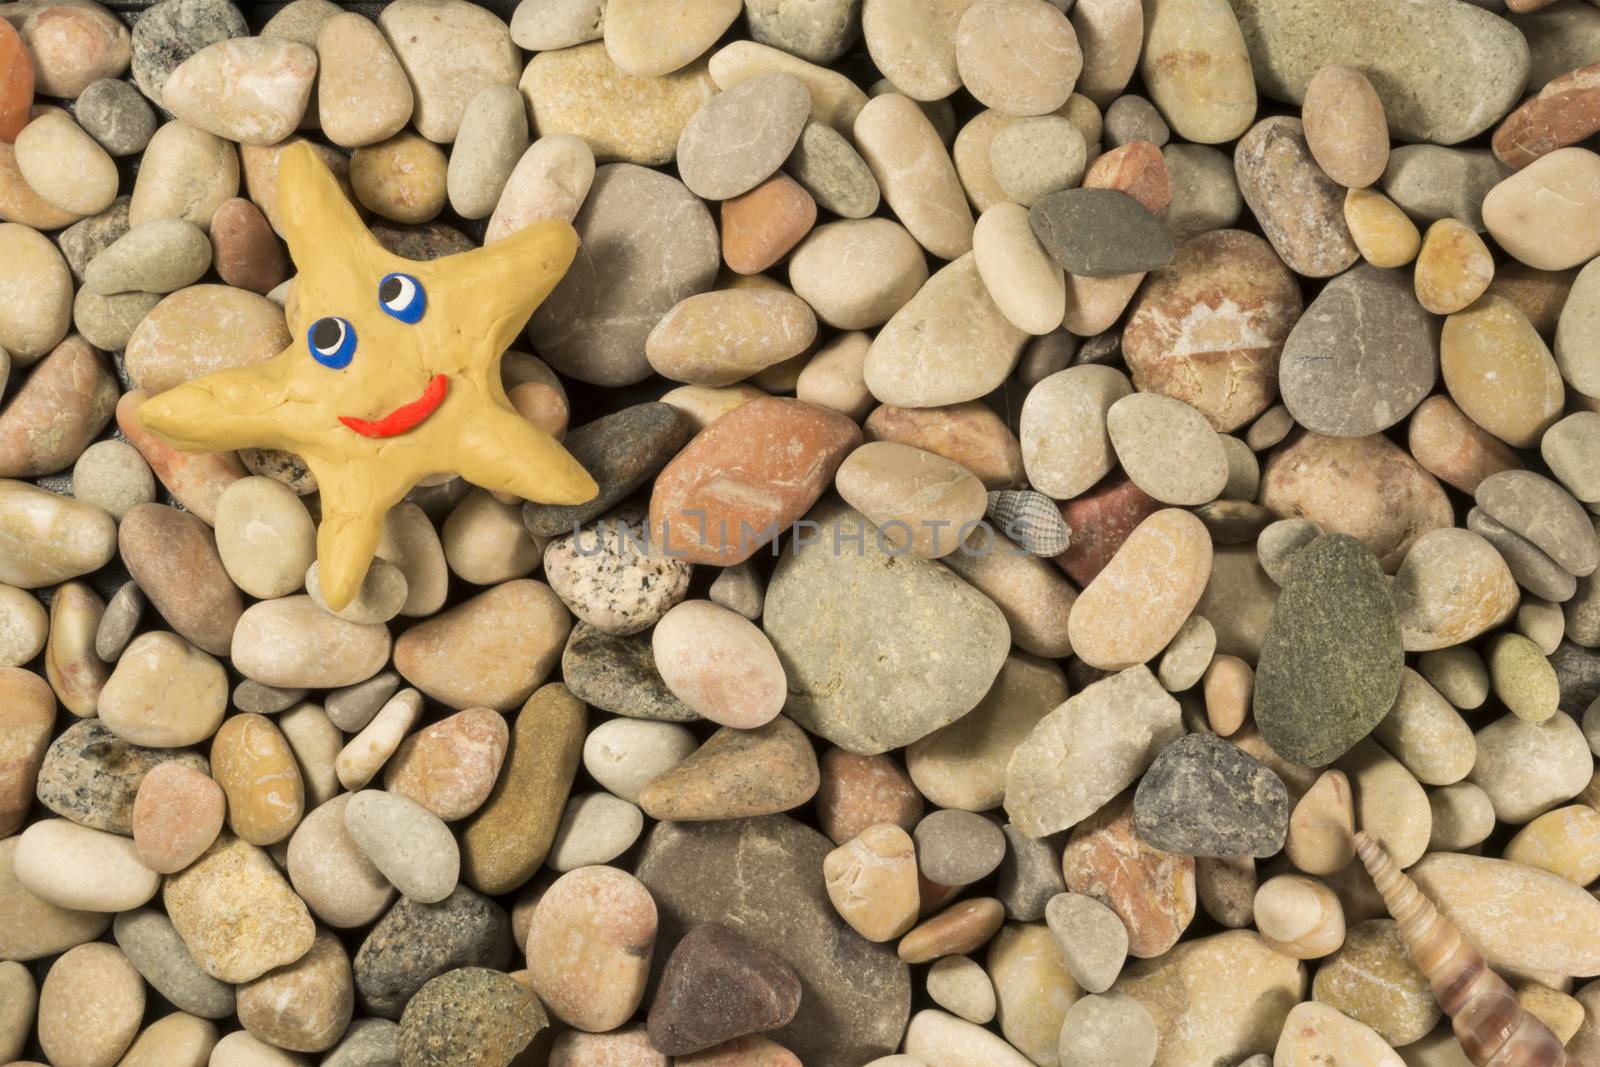 The background image of the marine pebbles with a plasticine star in the upper left corner.